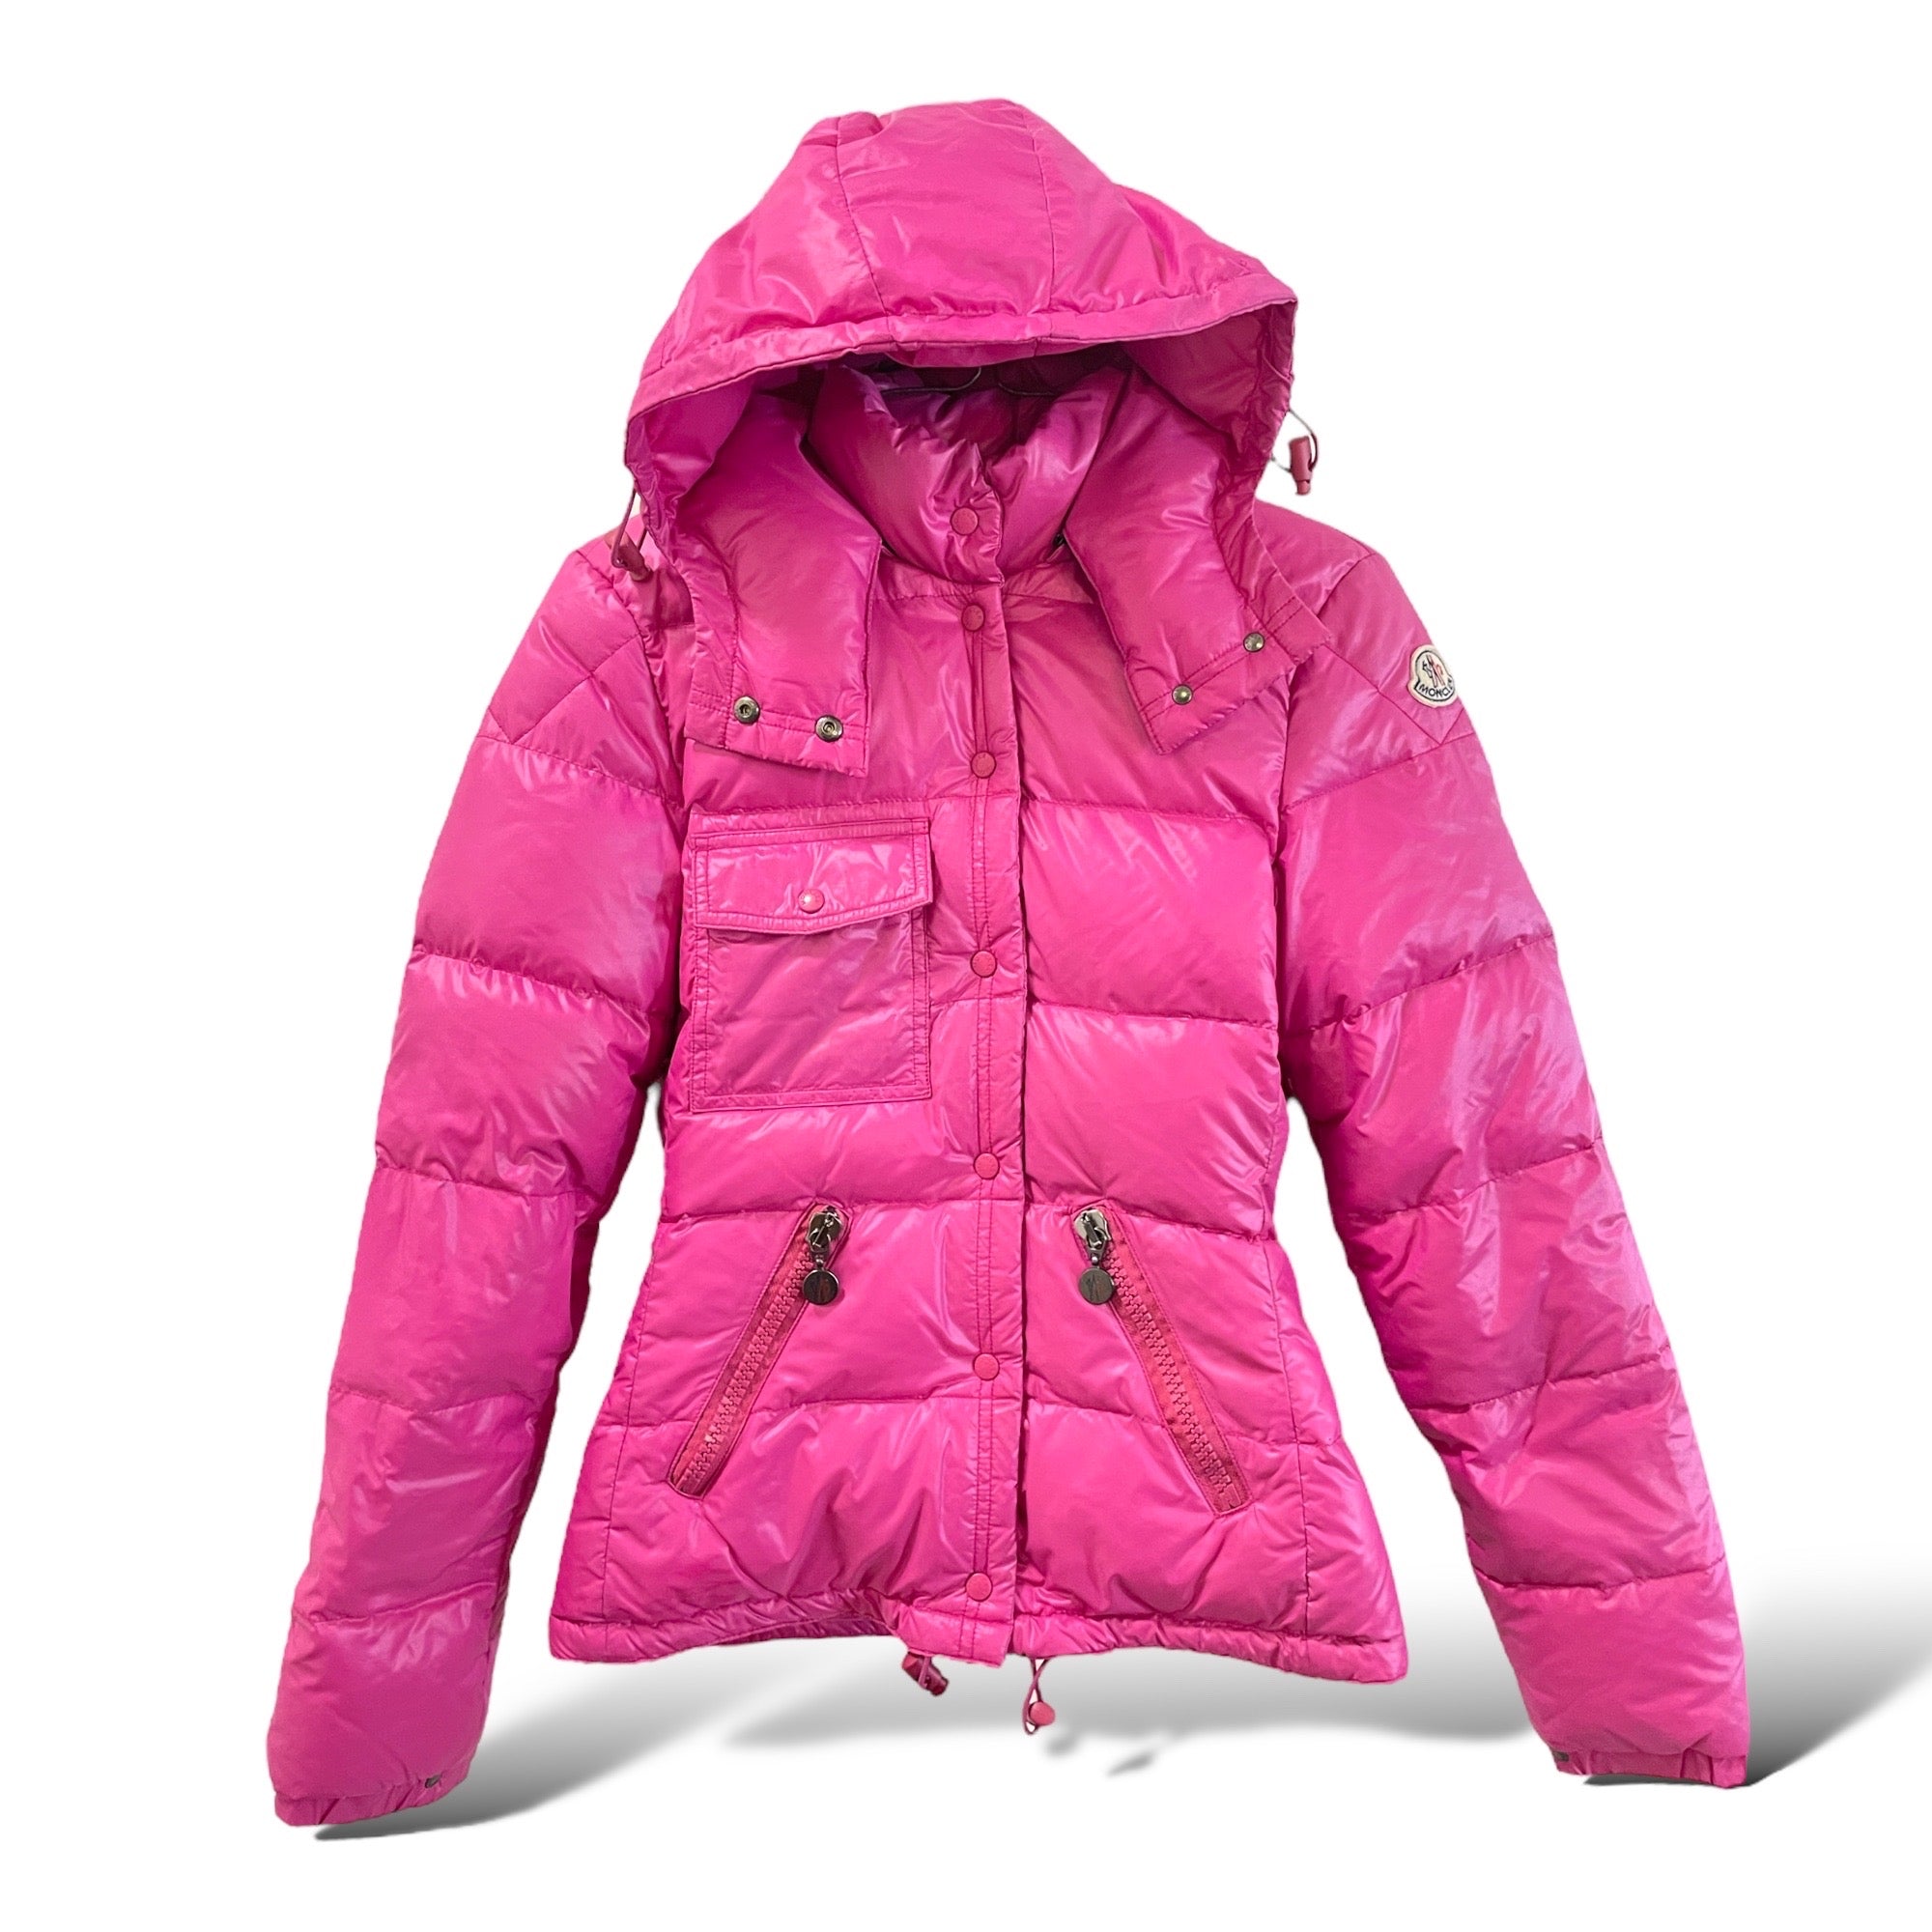 AUTHENTIC MONCLER Tessuto Down Puffer Jacket with Detachable Zip Hood |Size: 0|